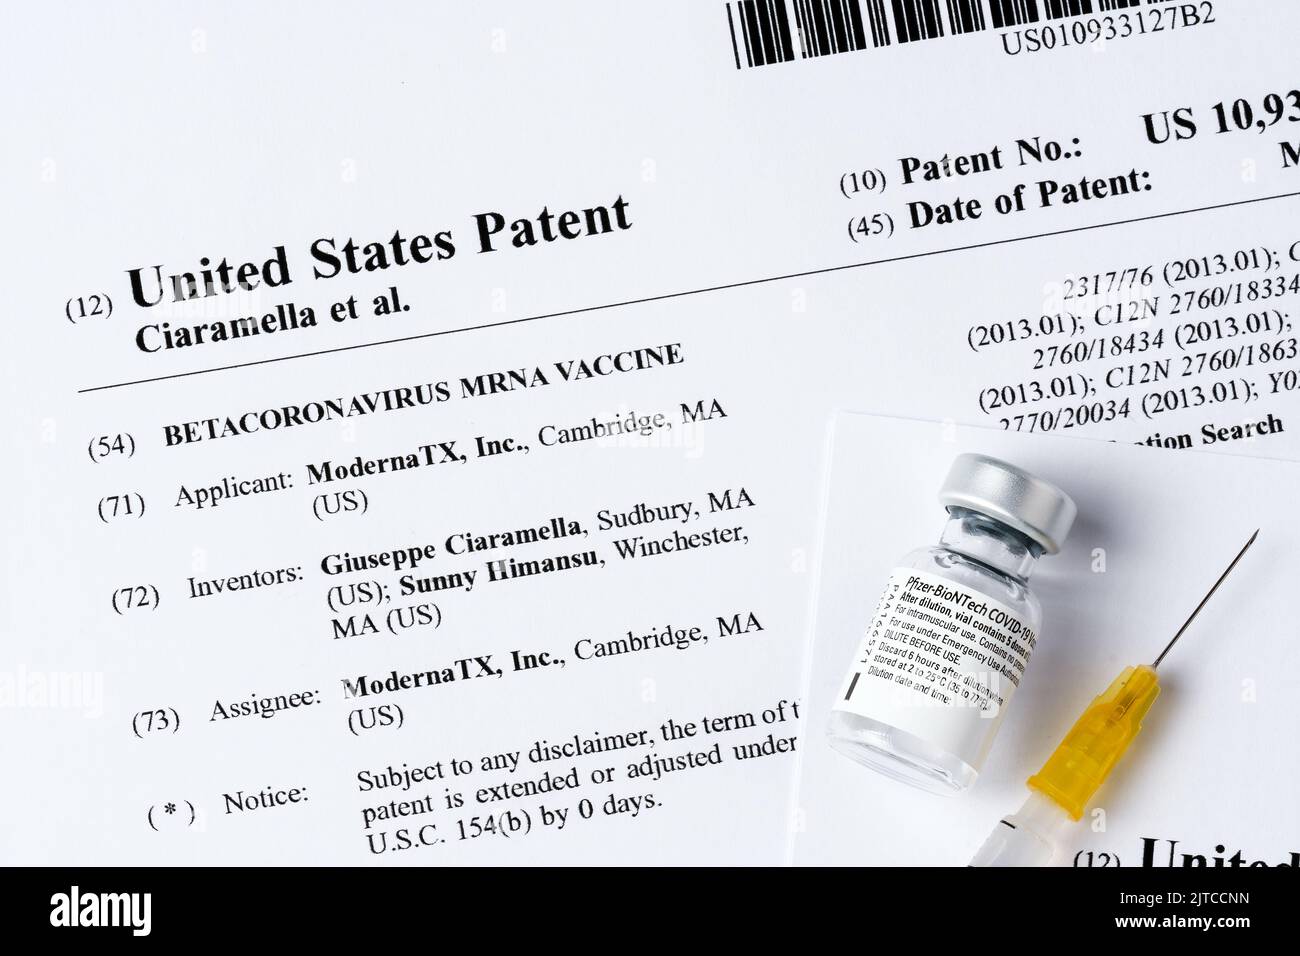 Pfizer Biontech vaccine on top of Moderna's patent. Real PFIZER vaccine vial and US10933127 patent which is part of patent infringement lawsuit. Conce Stock Photo